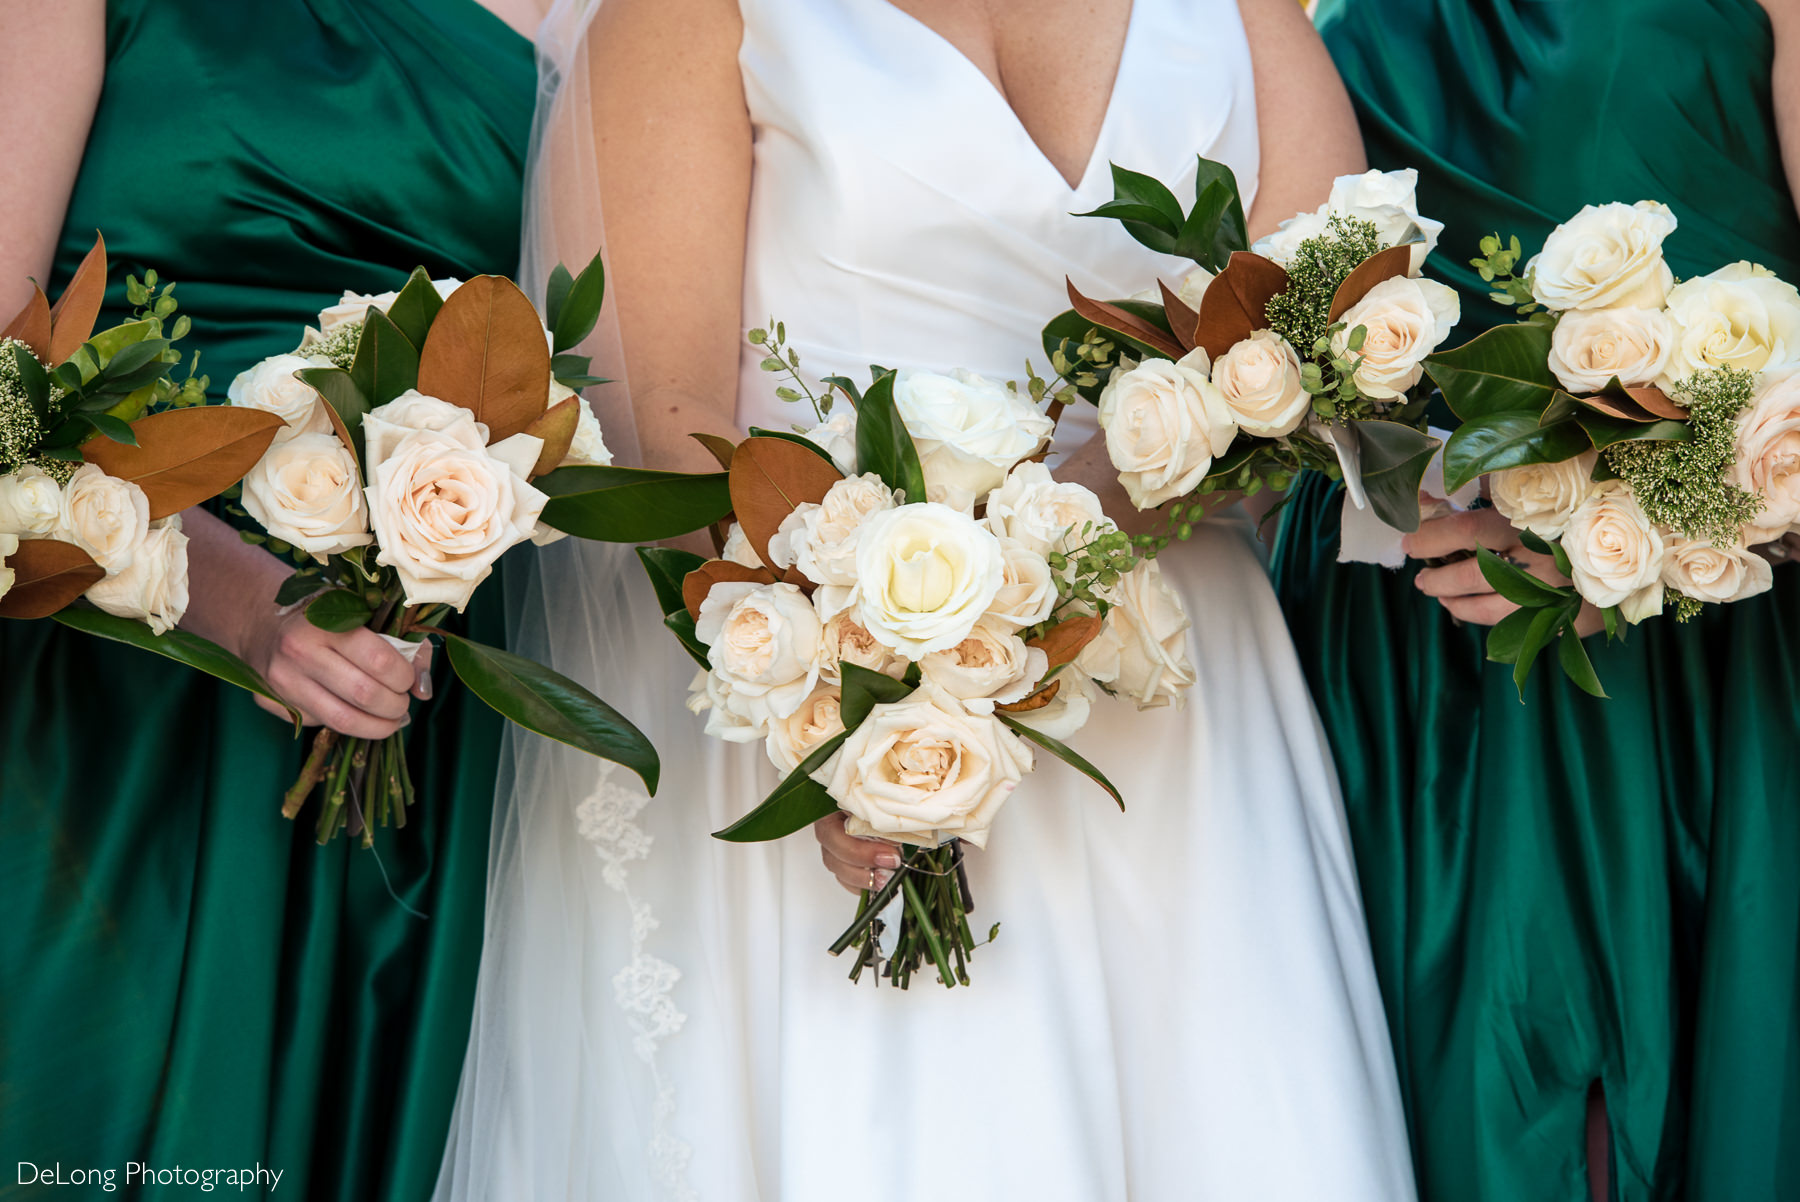 Bride and bridesmaids magnolia and rose bouquets by Charlotte Wedding Photographers DeLong Photography